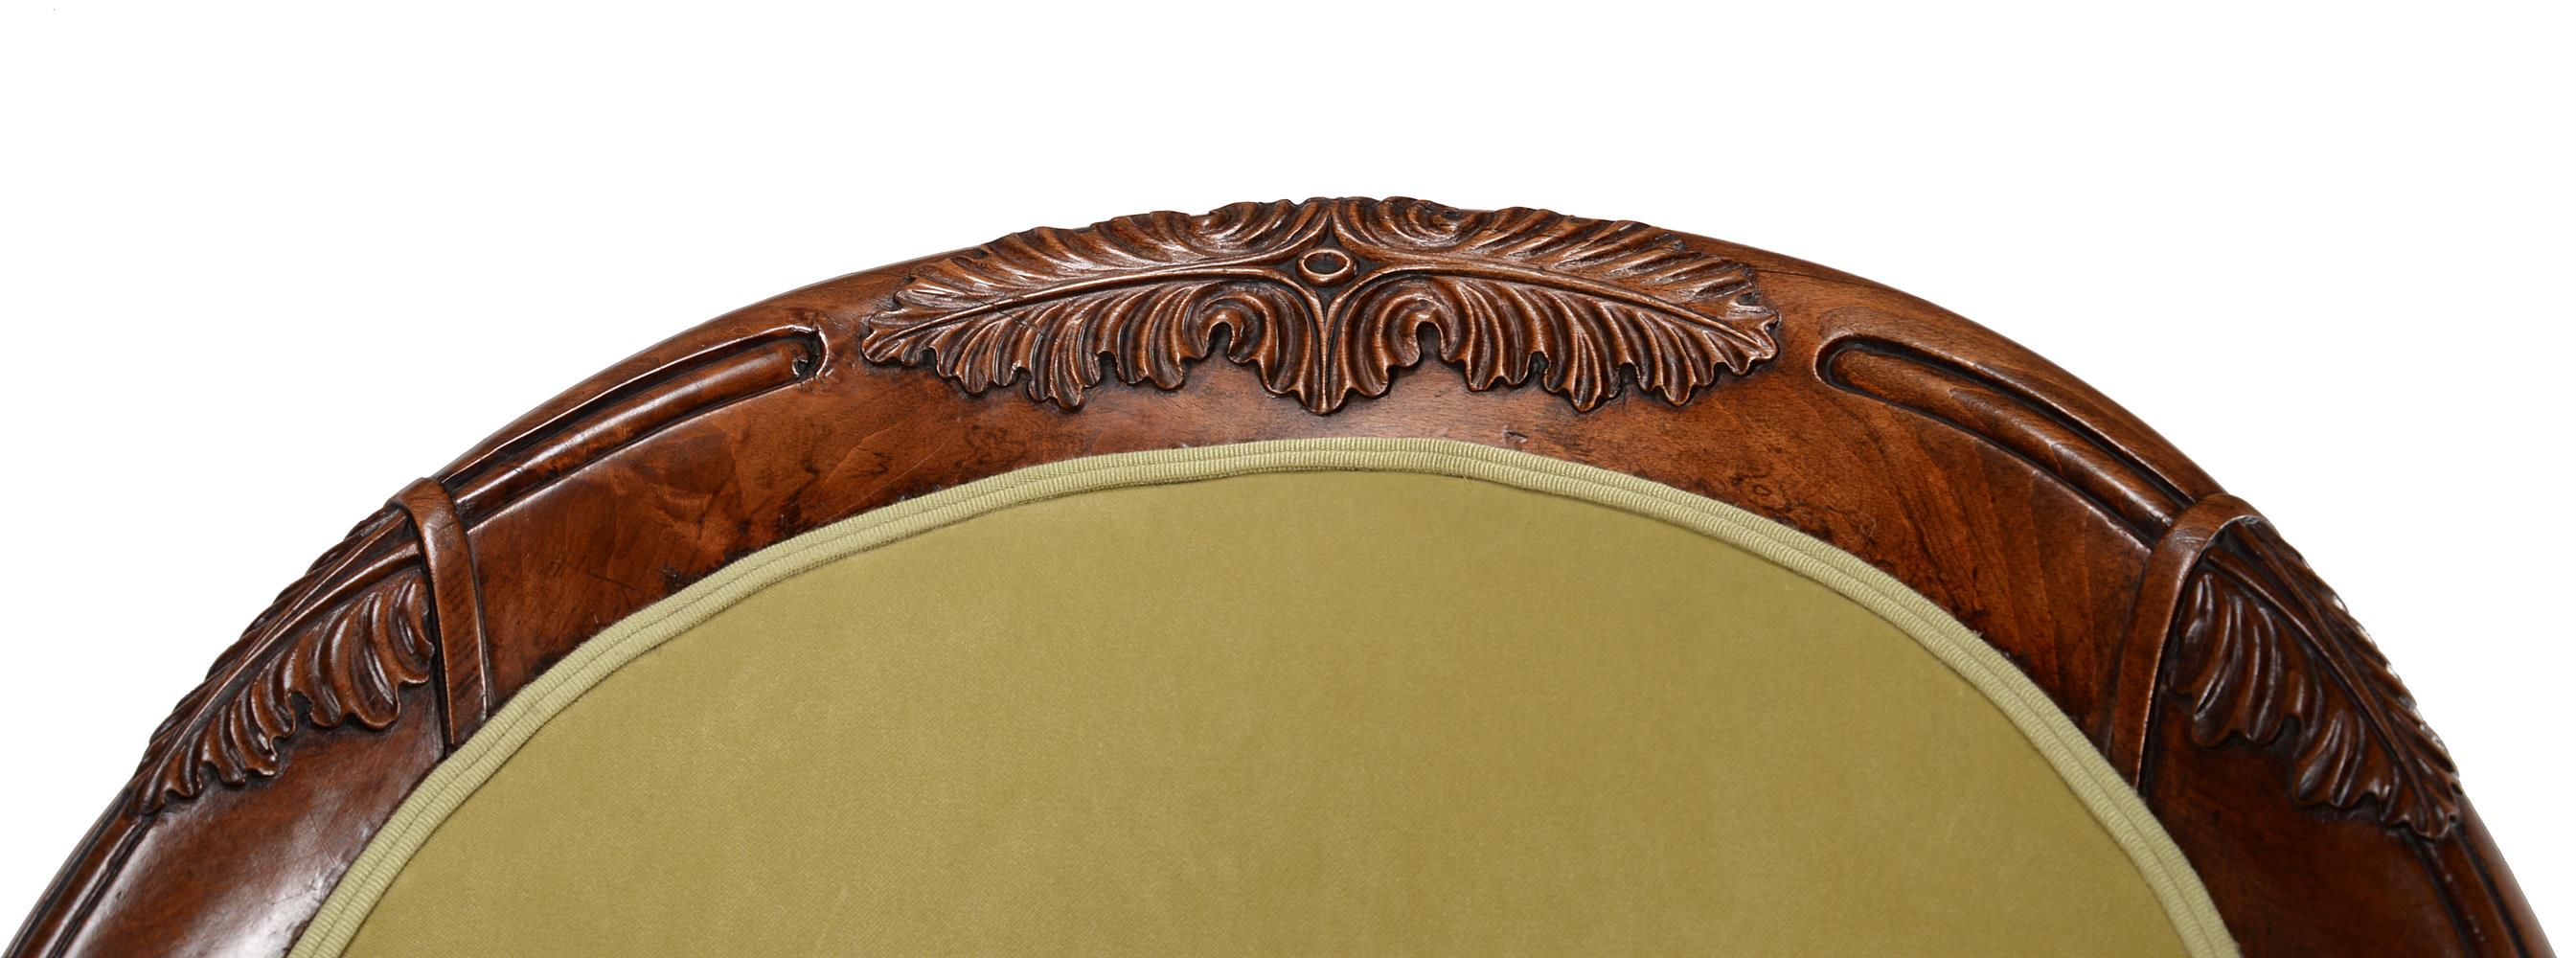 A GEORGE IV SIMULATED ROSEWOOD AND UPHOLSTERED BERGERE ARMCHAIR, ATTRIBUTED TO GILLOWS, CIRCA 1825 - Image 3 of 5